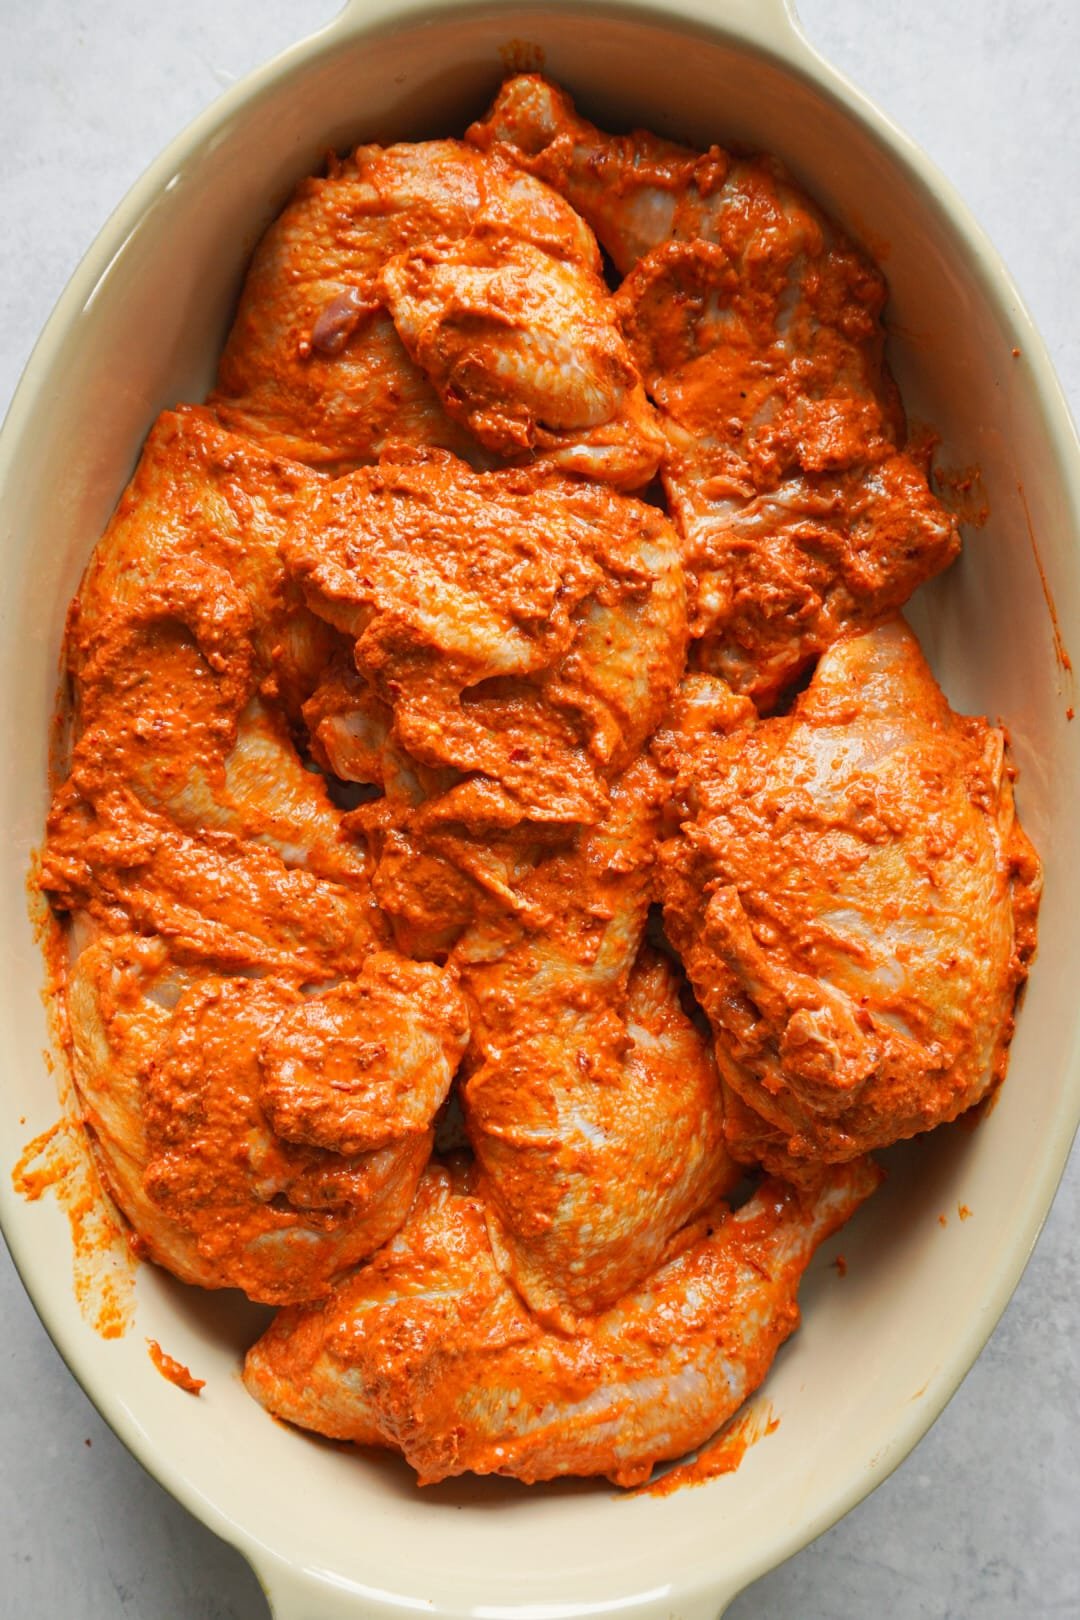 For the chicken mixture, mix together all the ingredients into a paste and massage into the chicken pieces.  